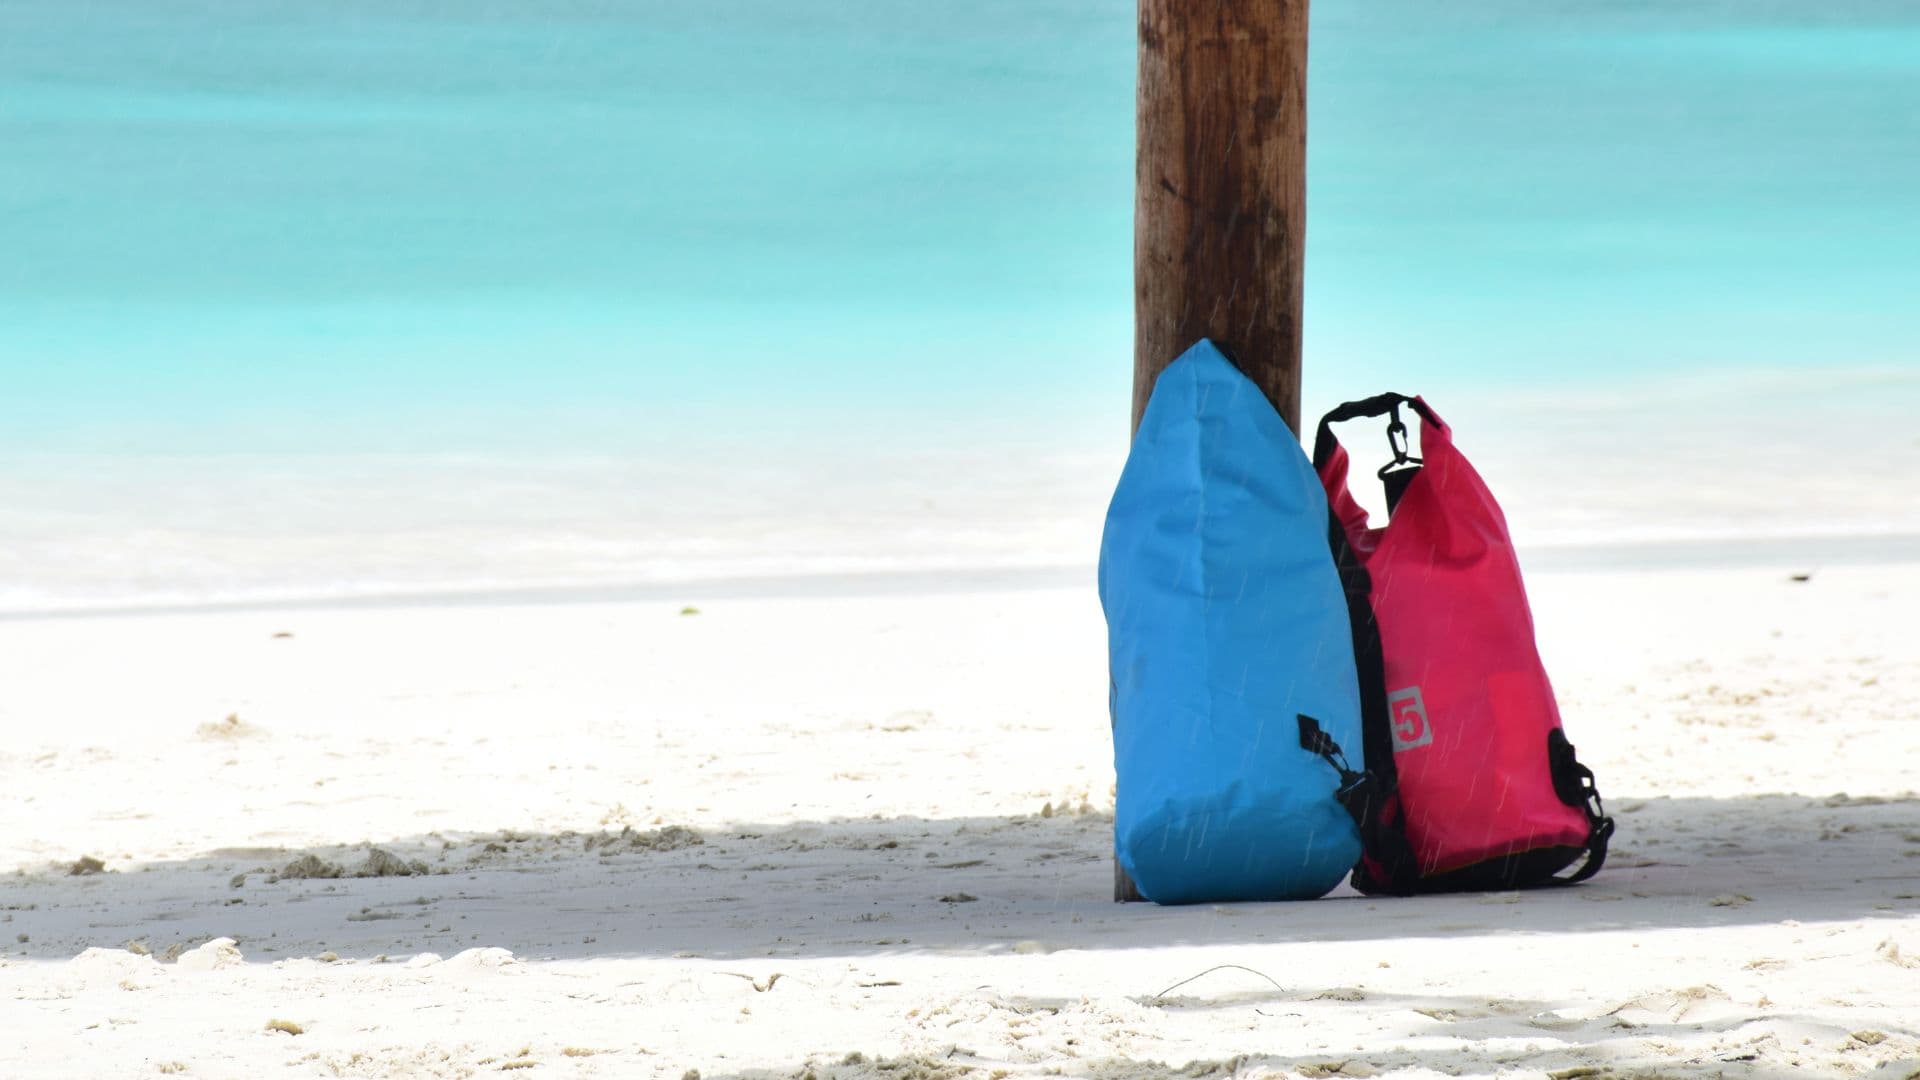 An image of two waterproof bags for boating on a beach.